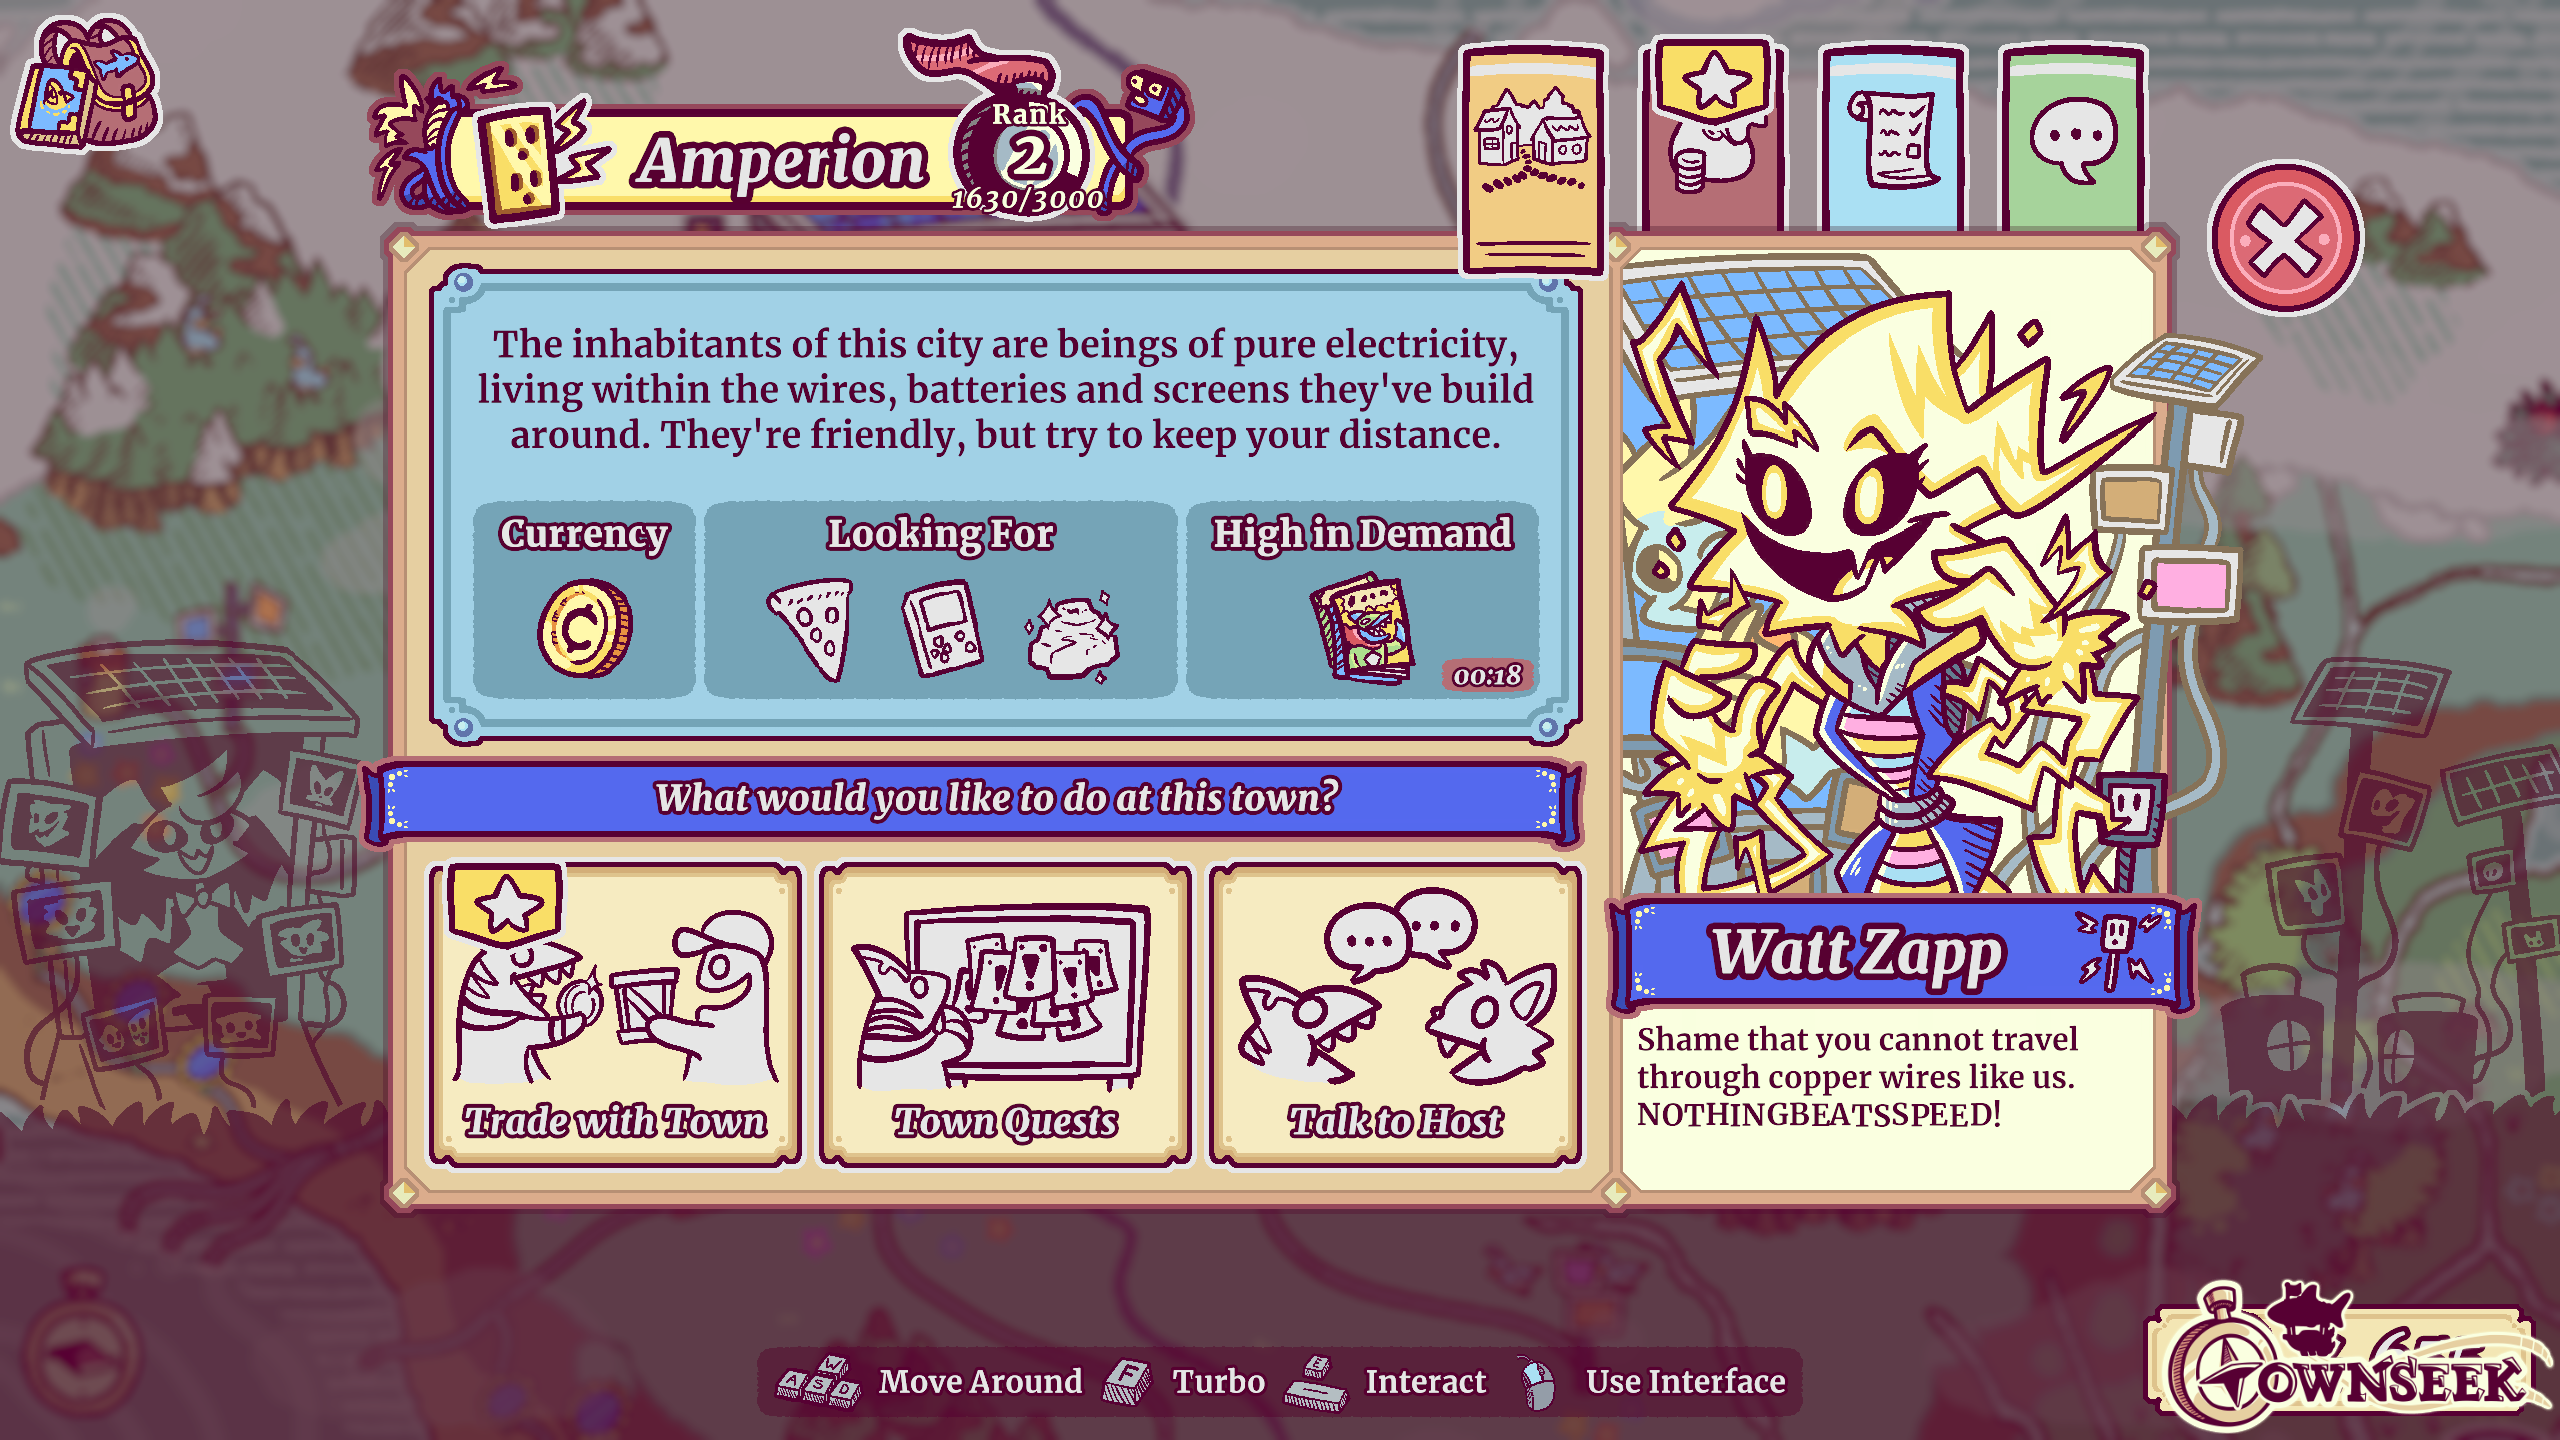 Screenshot of Townseek, featuring the town host of Amperion. The host is Watt Zapp, a sentient electric being!